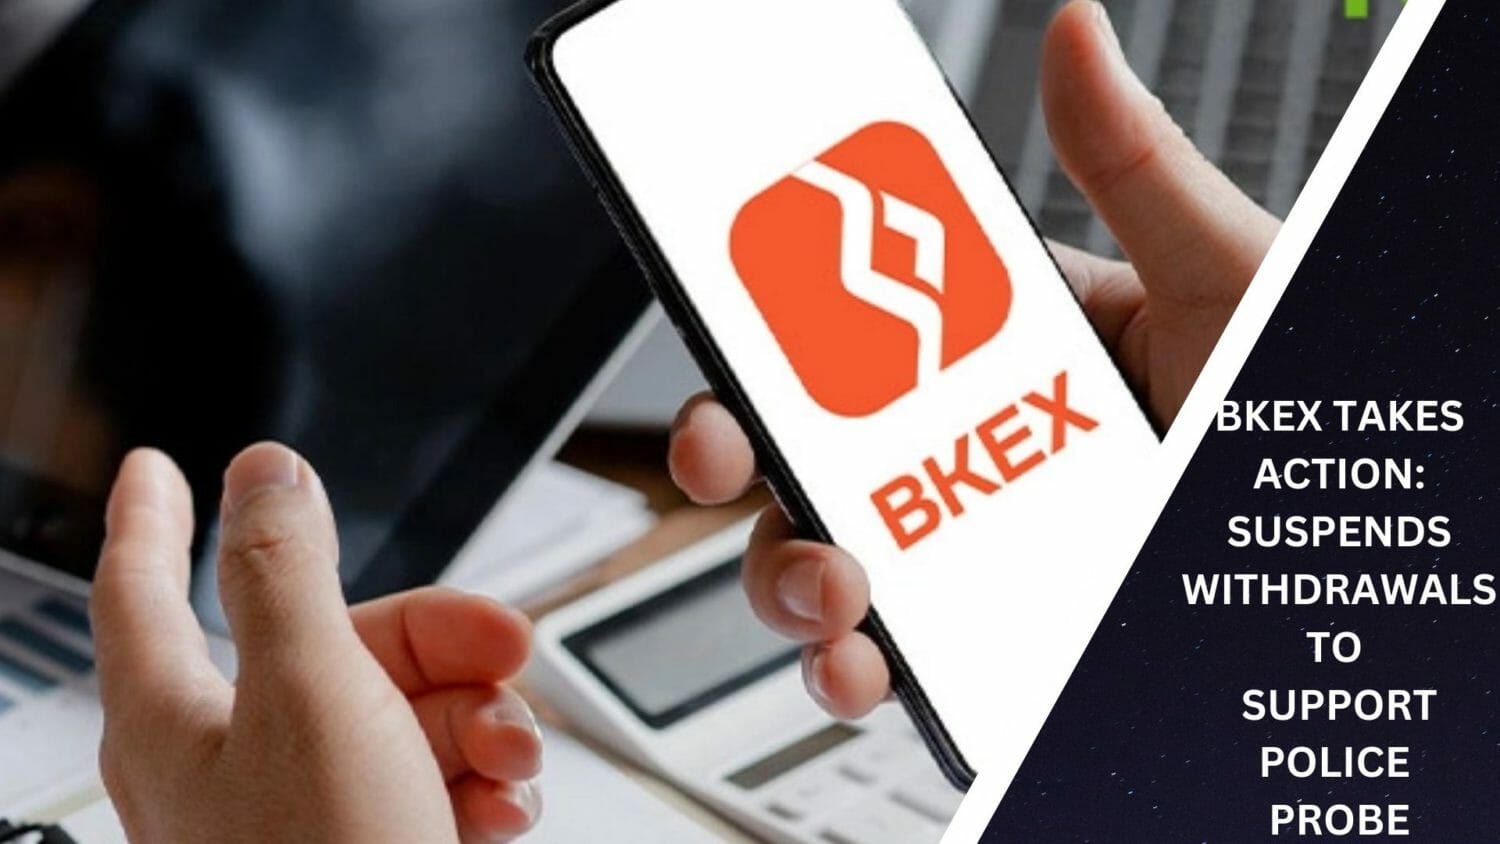 Bkex Takes Action: Suspends Withdrawals To Support Police Probe